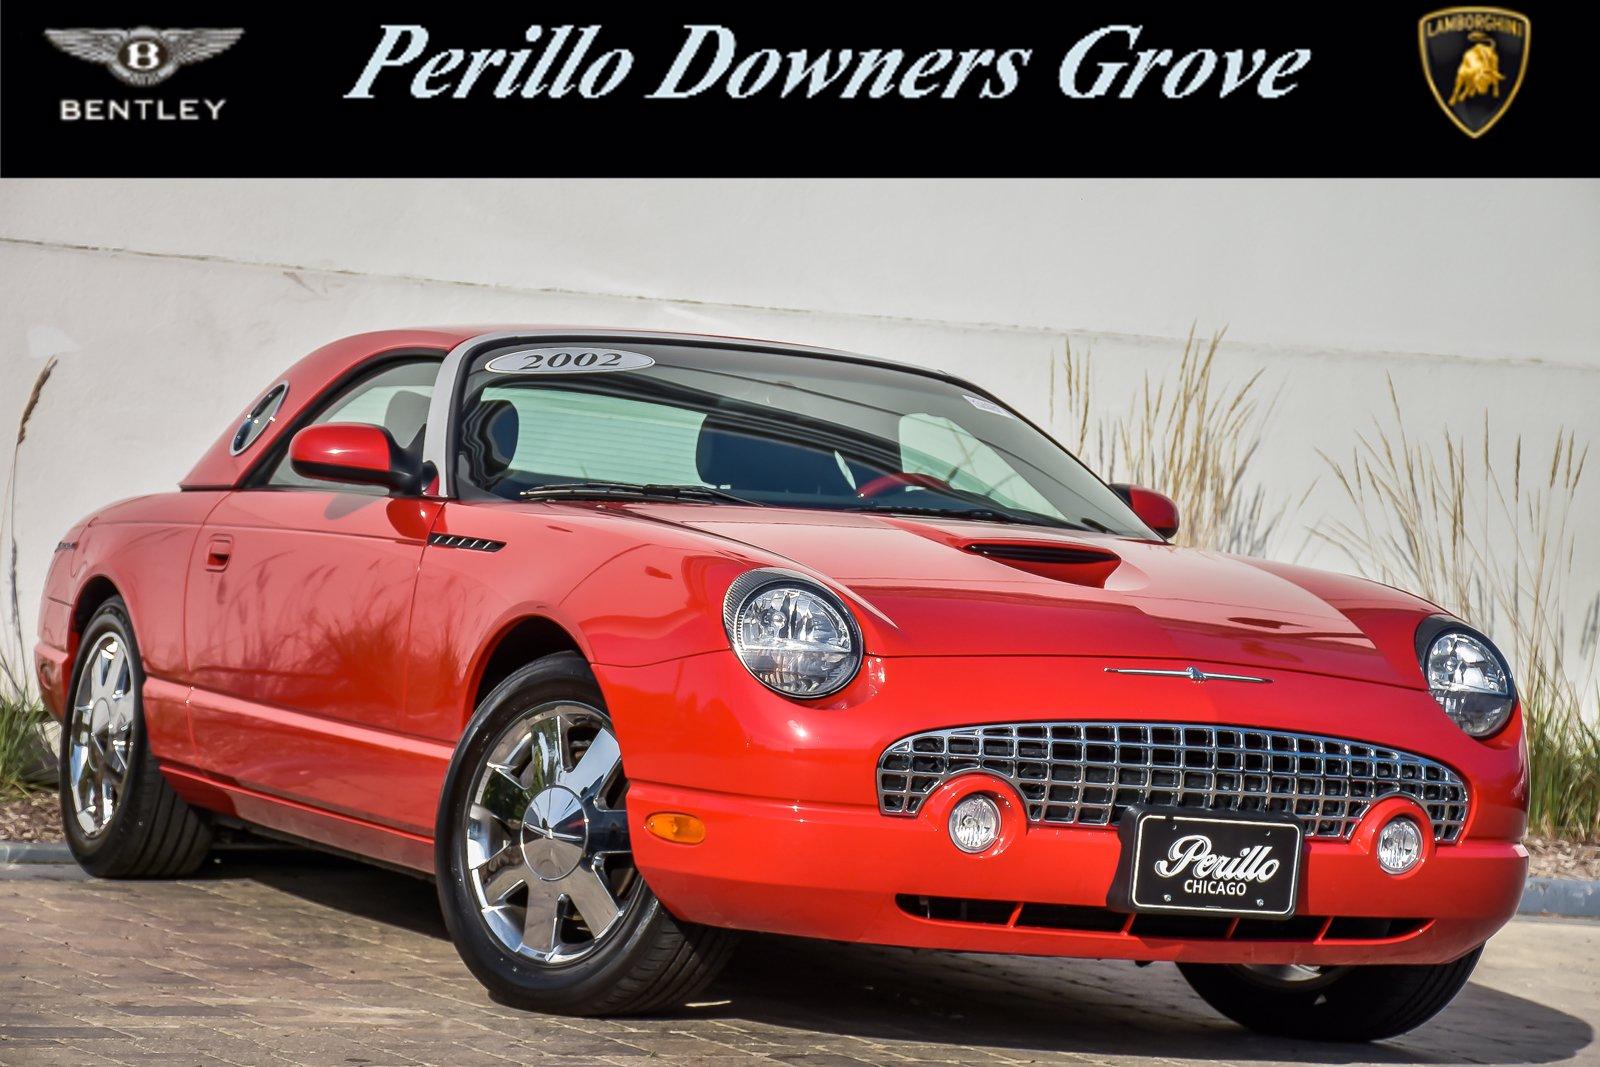 Used 2002 Ford Thunderbird Premium w/Hardtop | Downers Grove, IL